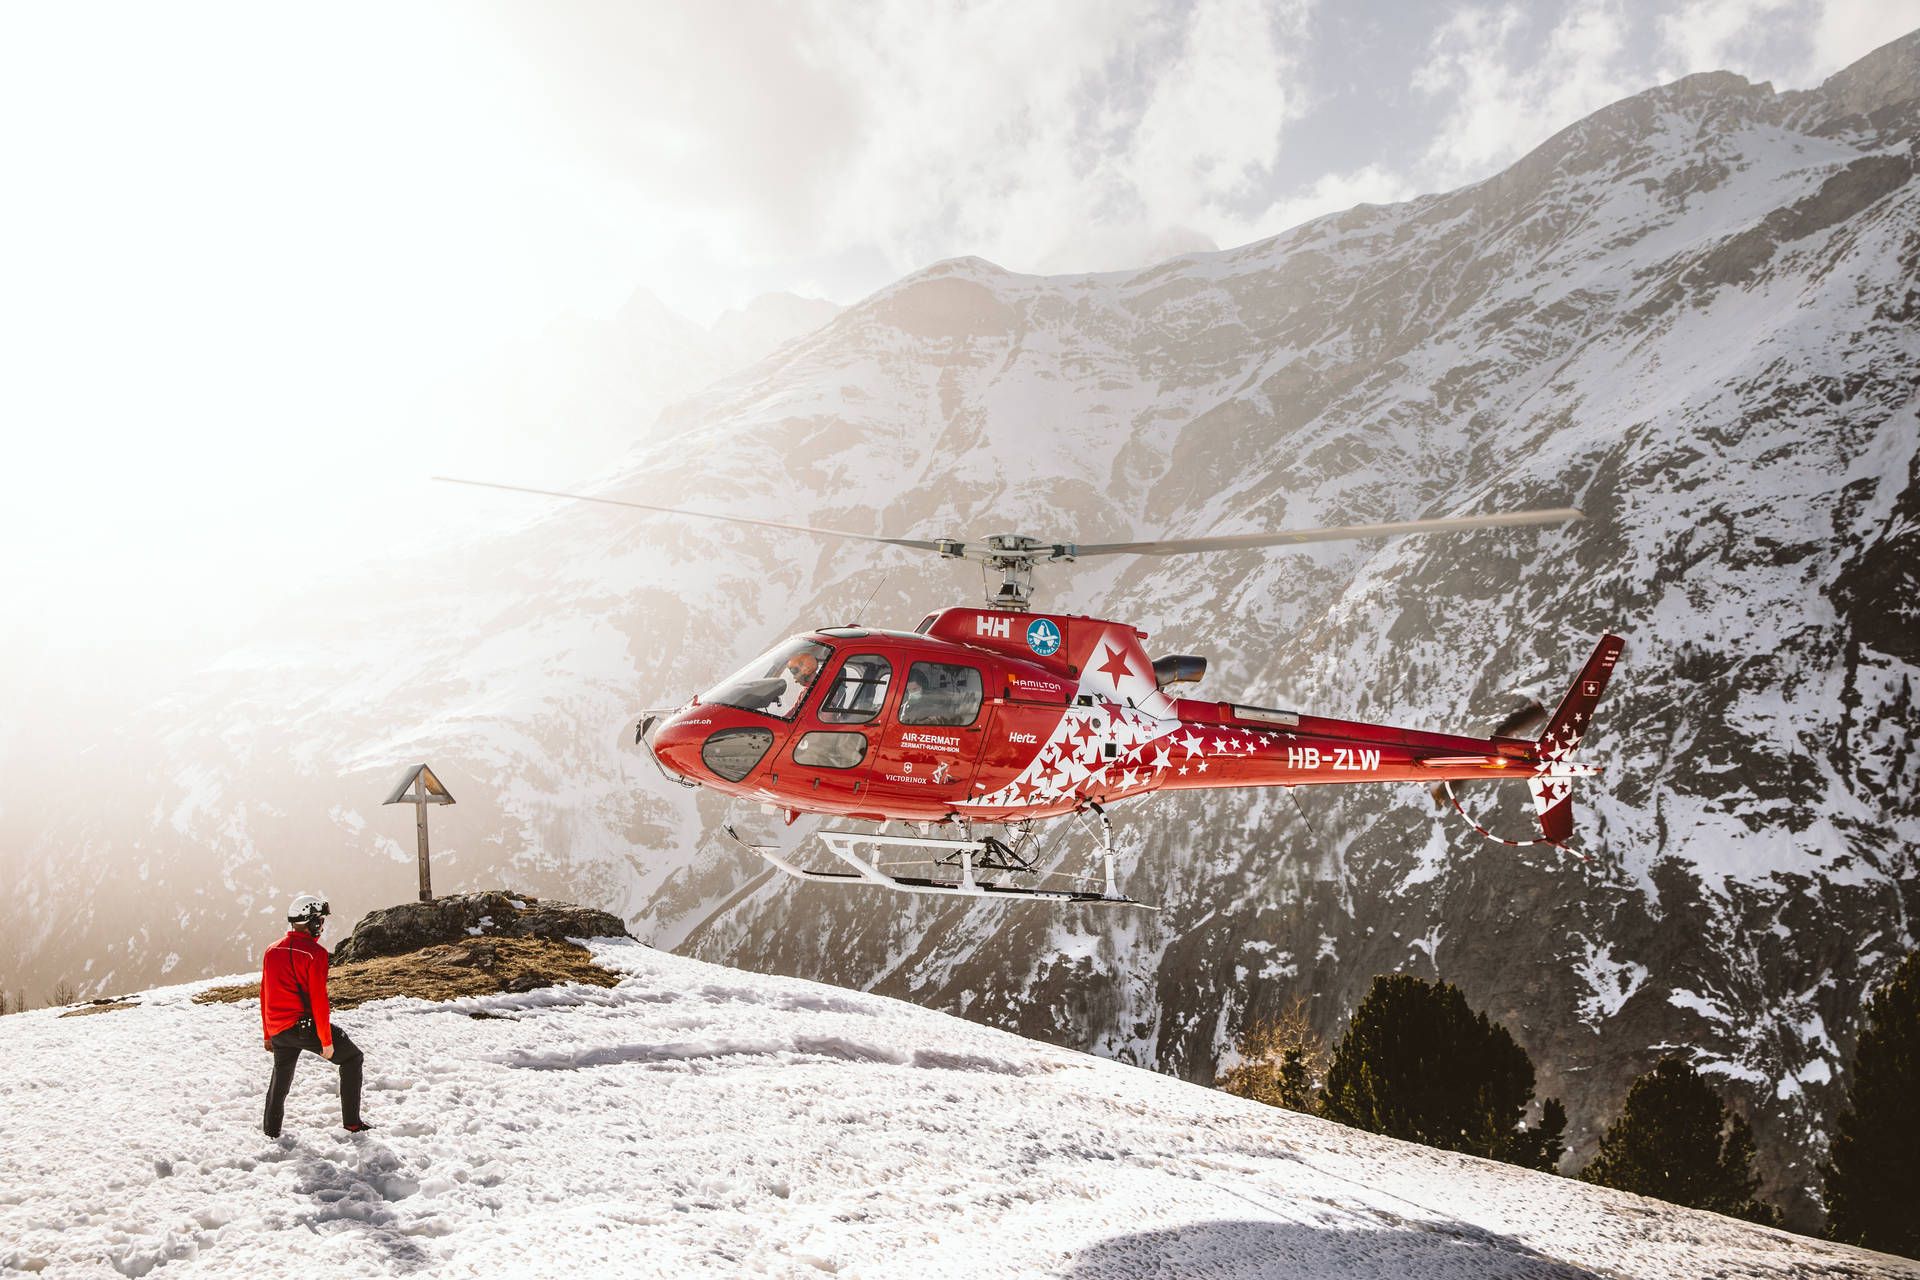 Helicopter On Snowy Mountain Background